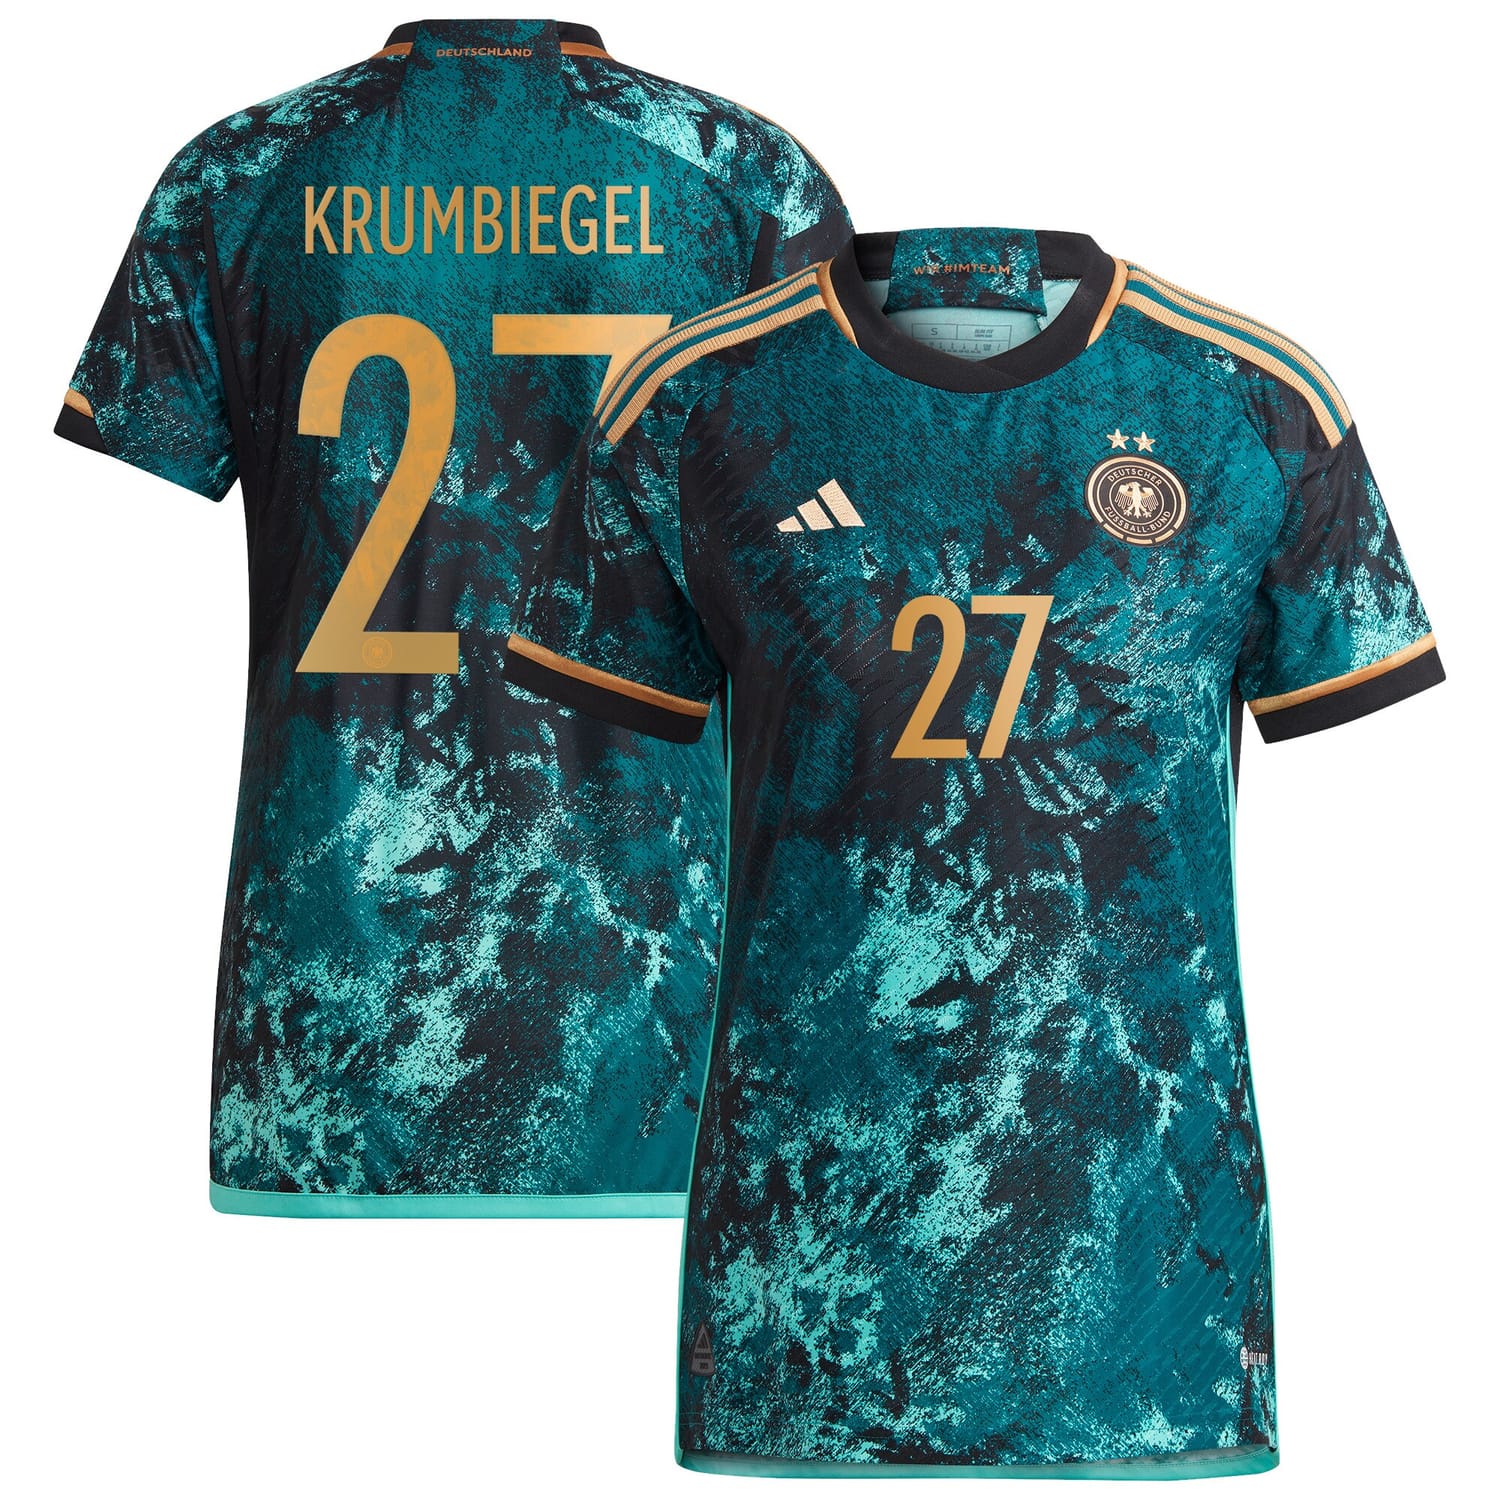 Germany National Team Away Authentic Jersey Shirt 2023 player Paulina Krumbiegel 27 printing for Women